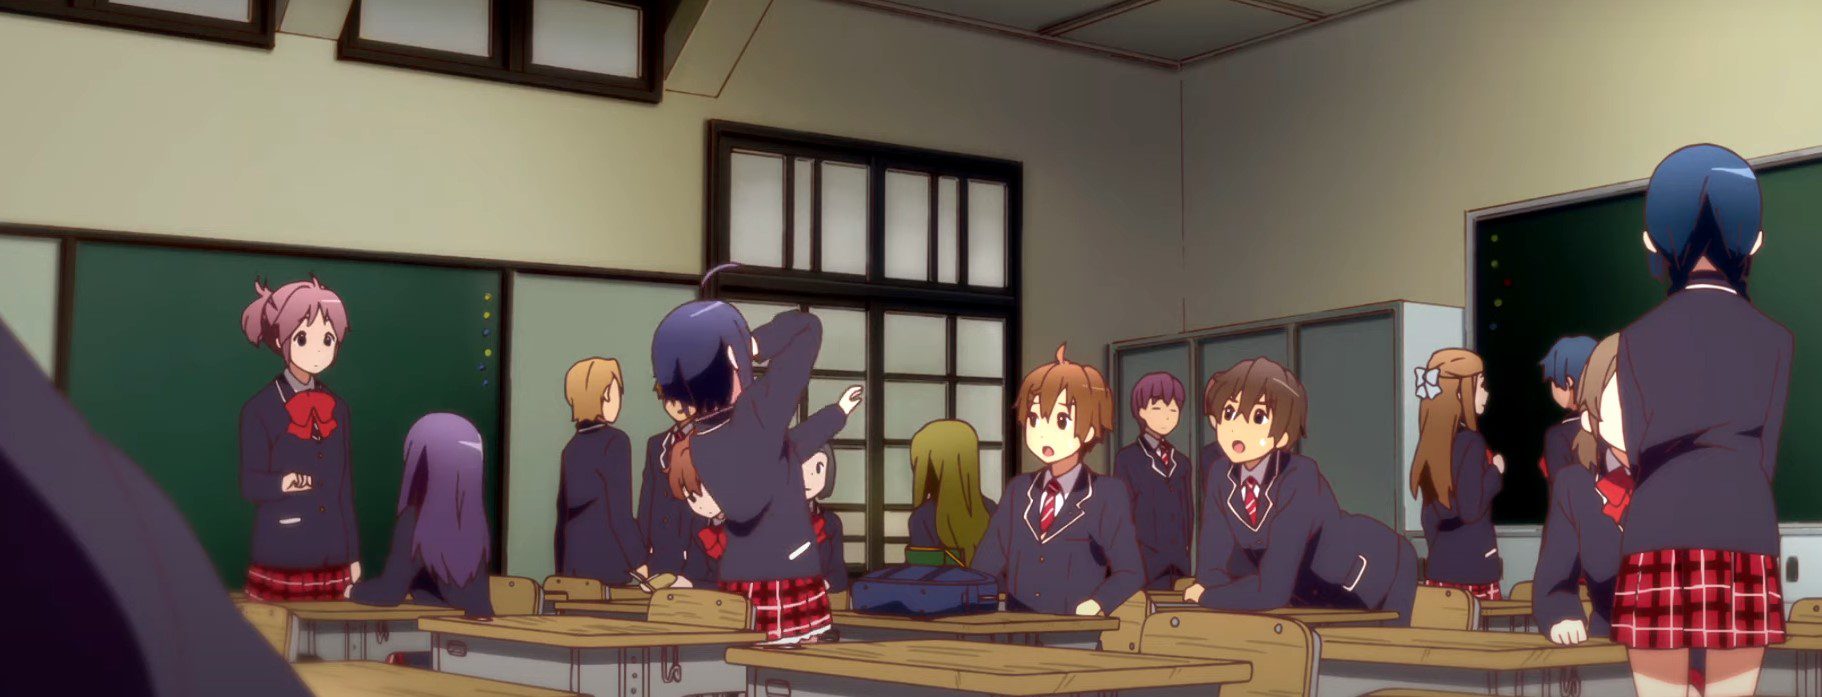 Love Chunibyo & Other Delusions Watch Order